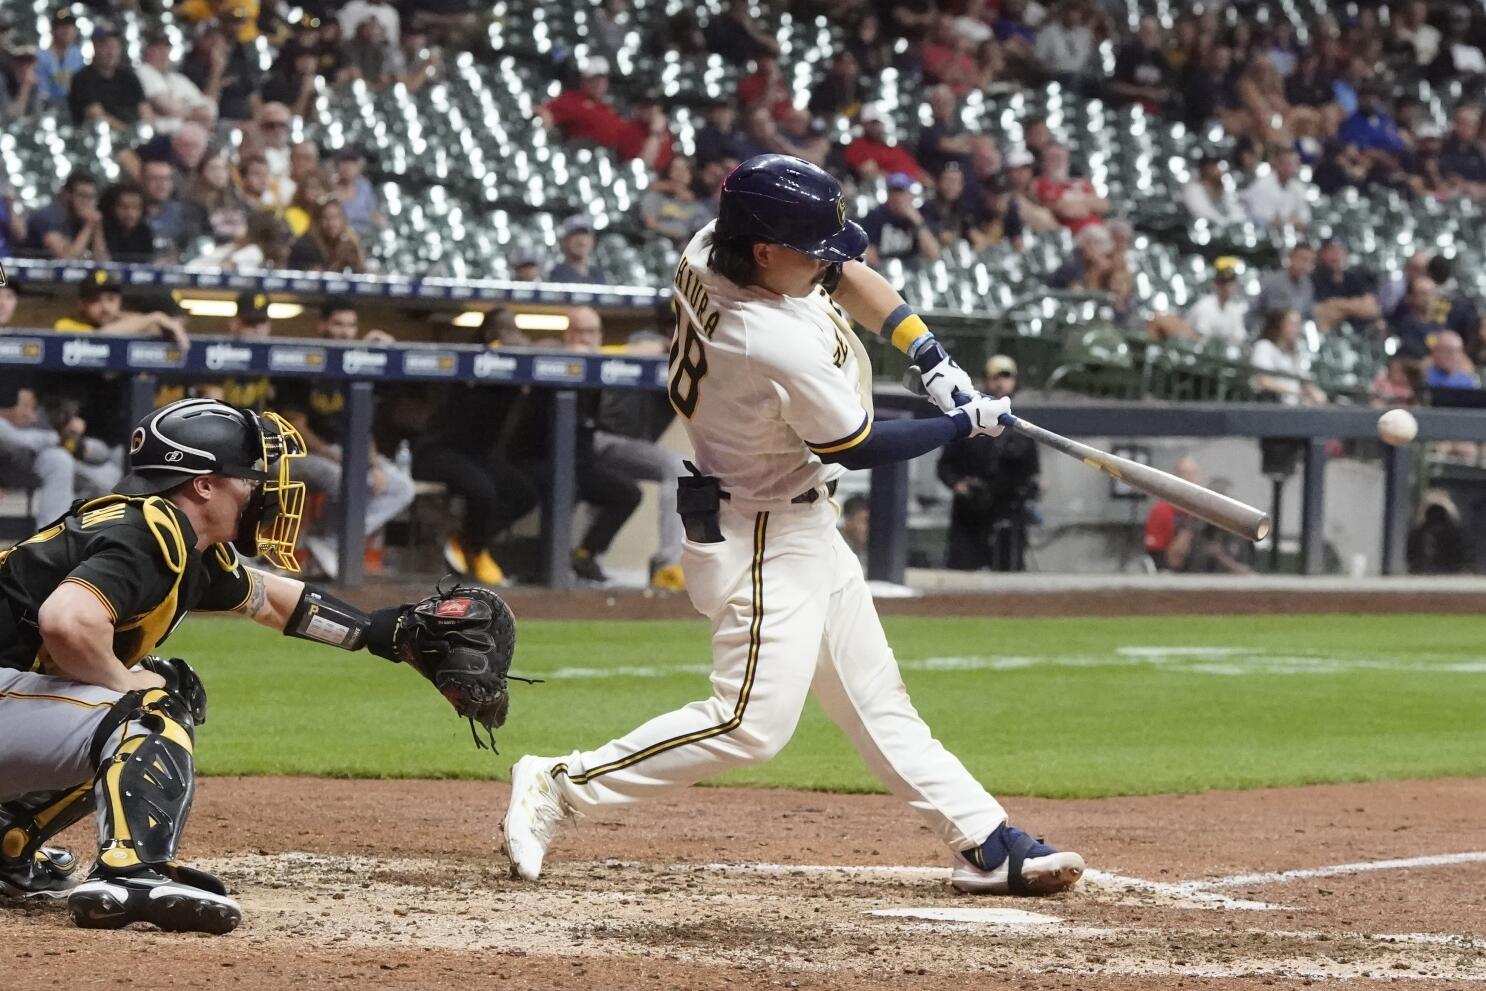 Mitchell, Hiura homer late, Brewers rally past Pirates 7-5 - The